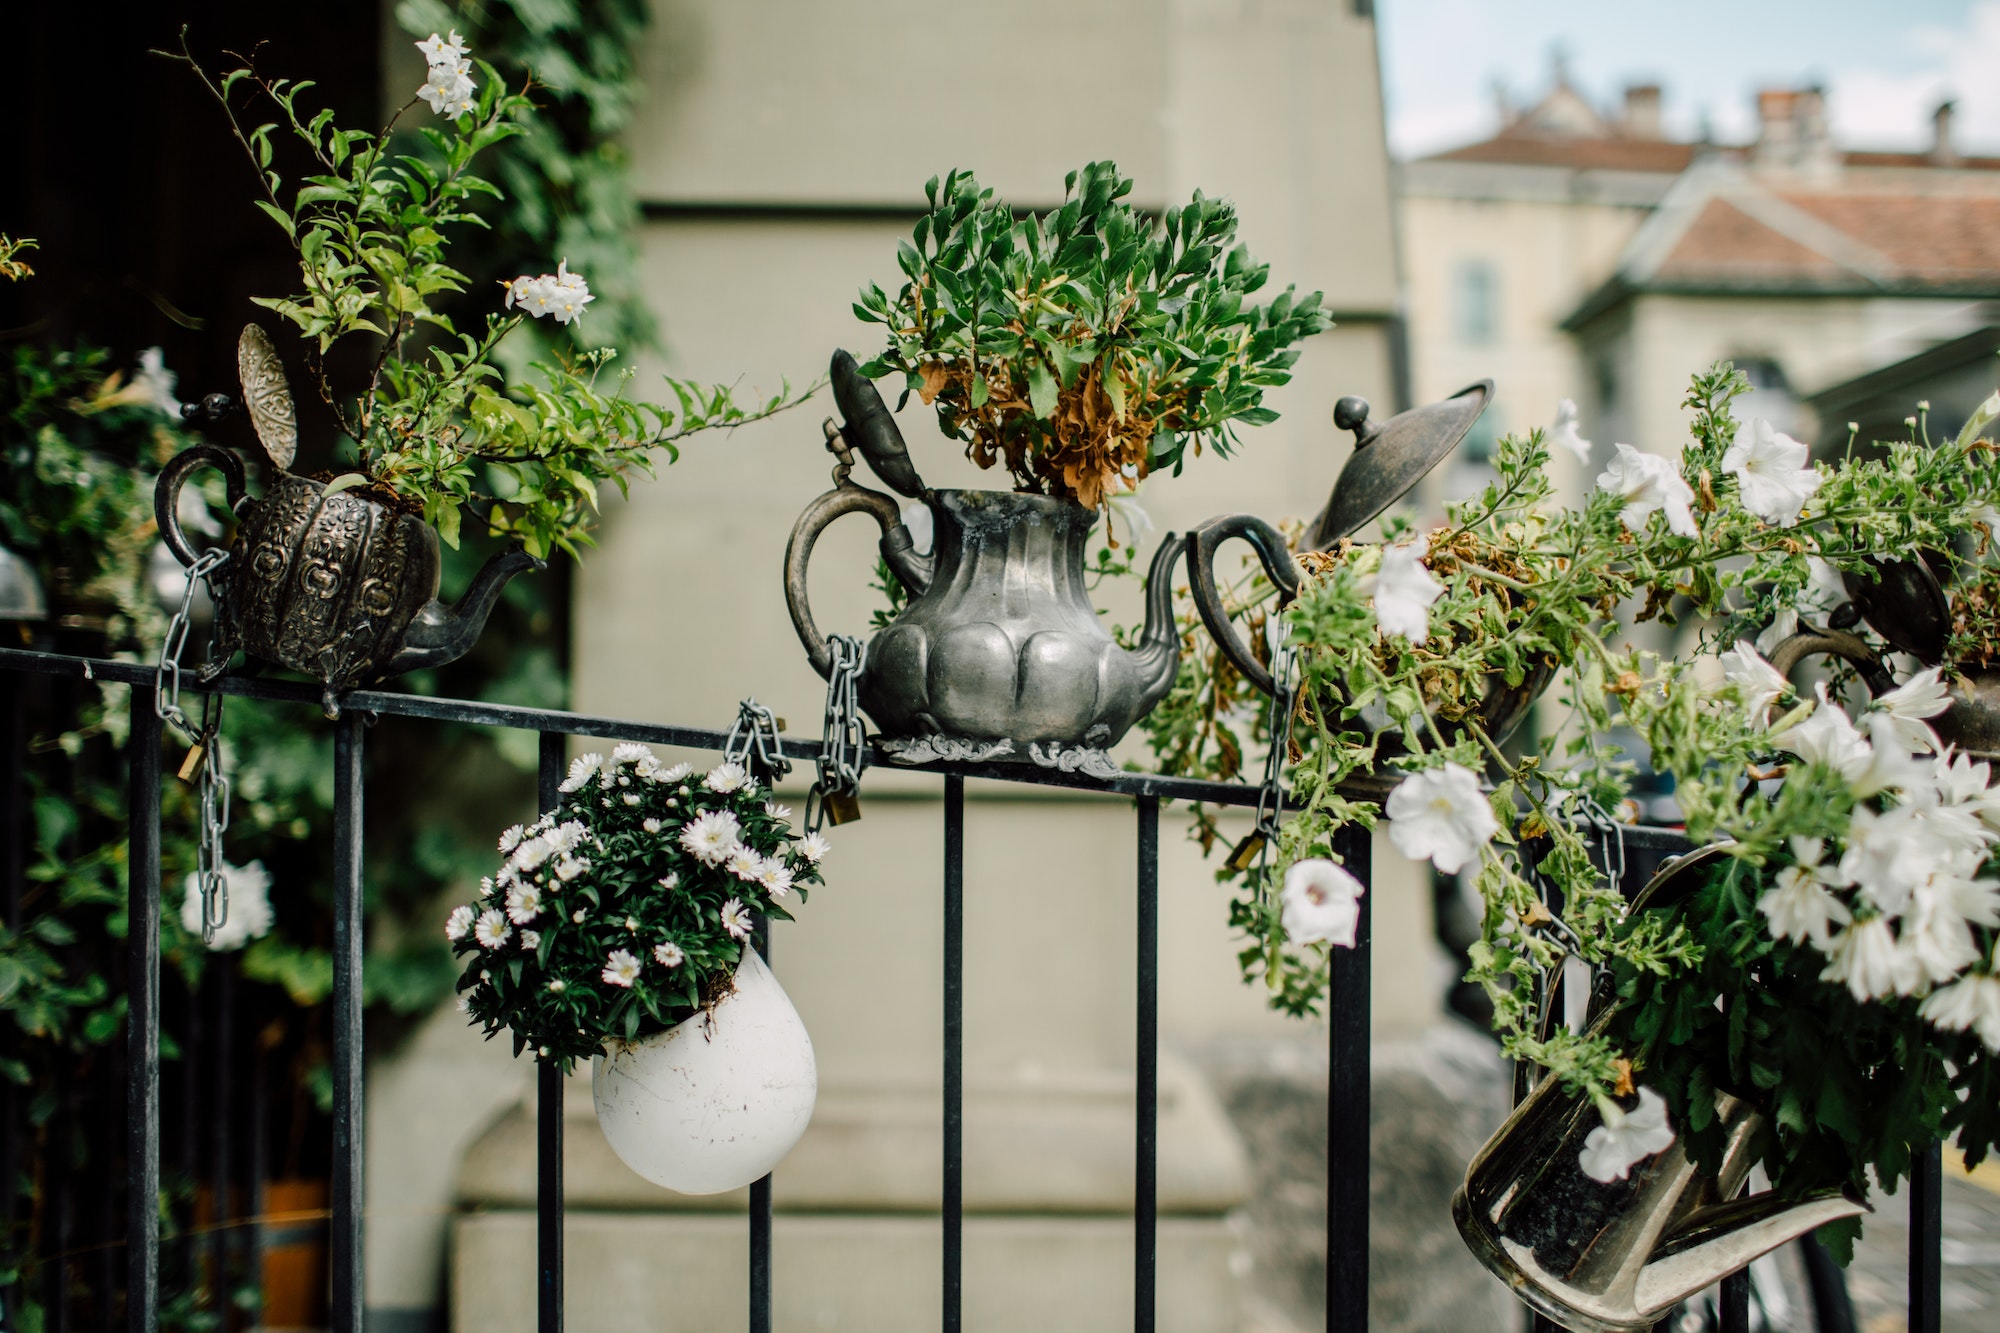 Flowers potted in teapots on a fence